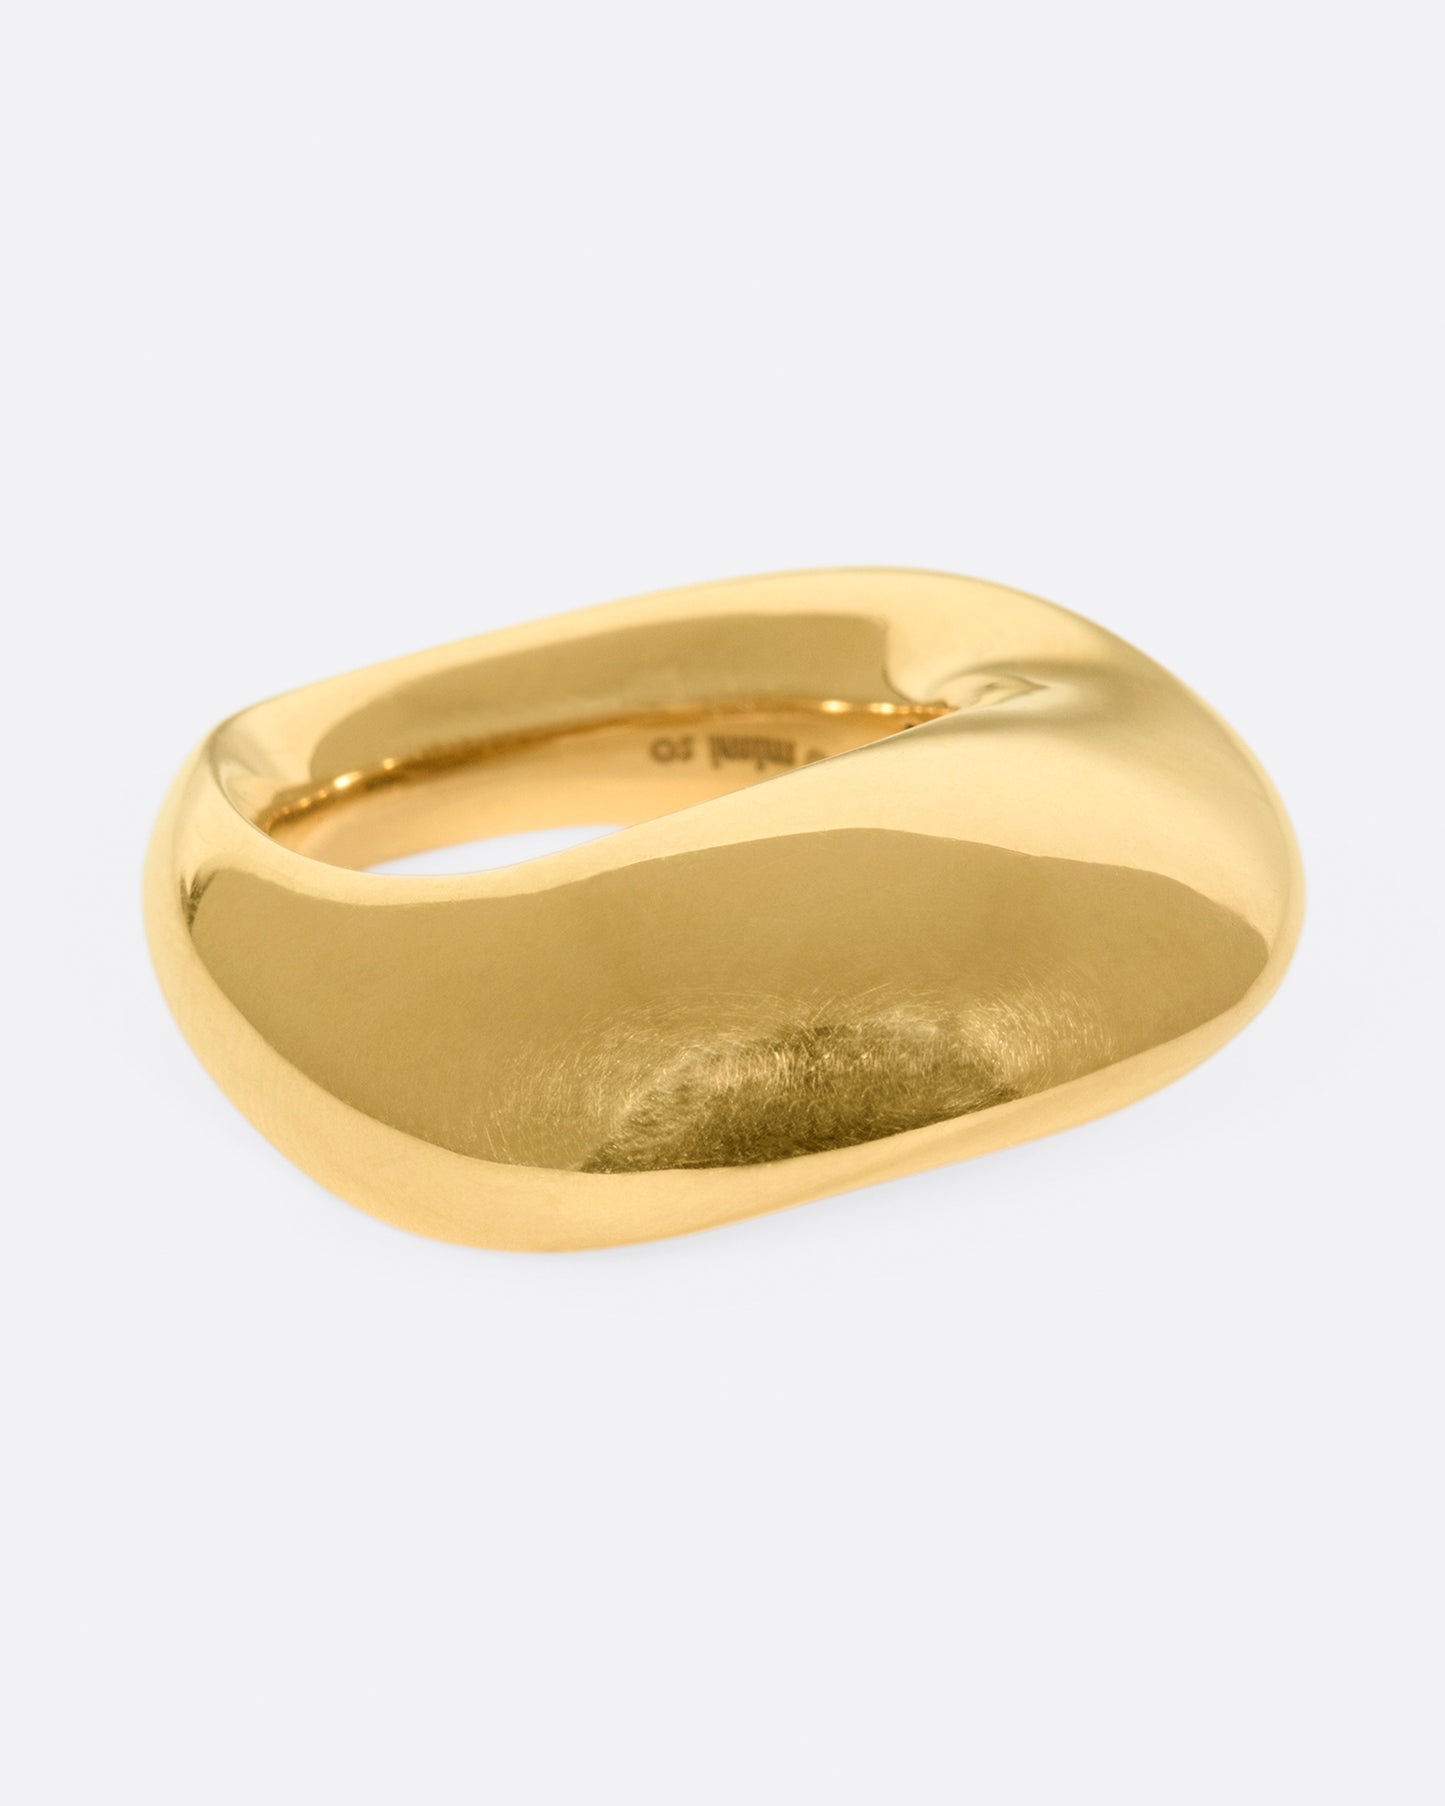 An abstract shaped gold ring with a yin yang symbol cutout on the inside of the band.